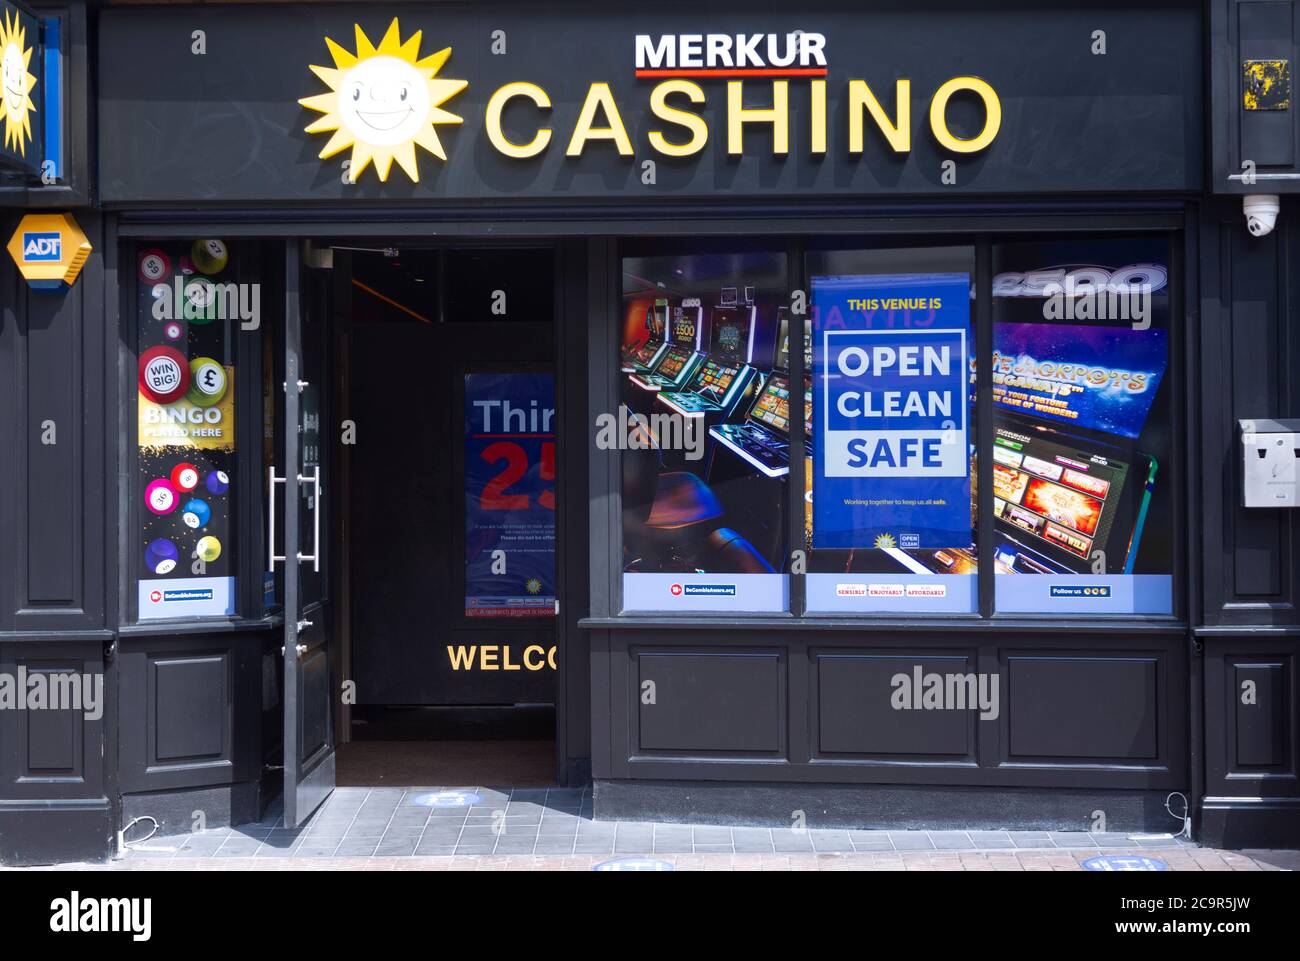 Merkur Cashino High Street Gaming place Shop, Carr Street, Ipswich, Suffolk, Angleterre, Royaume-Uni Banque D'Images